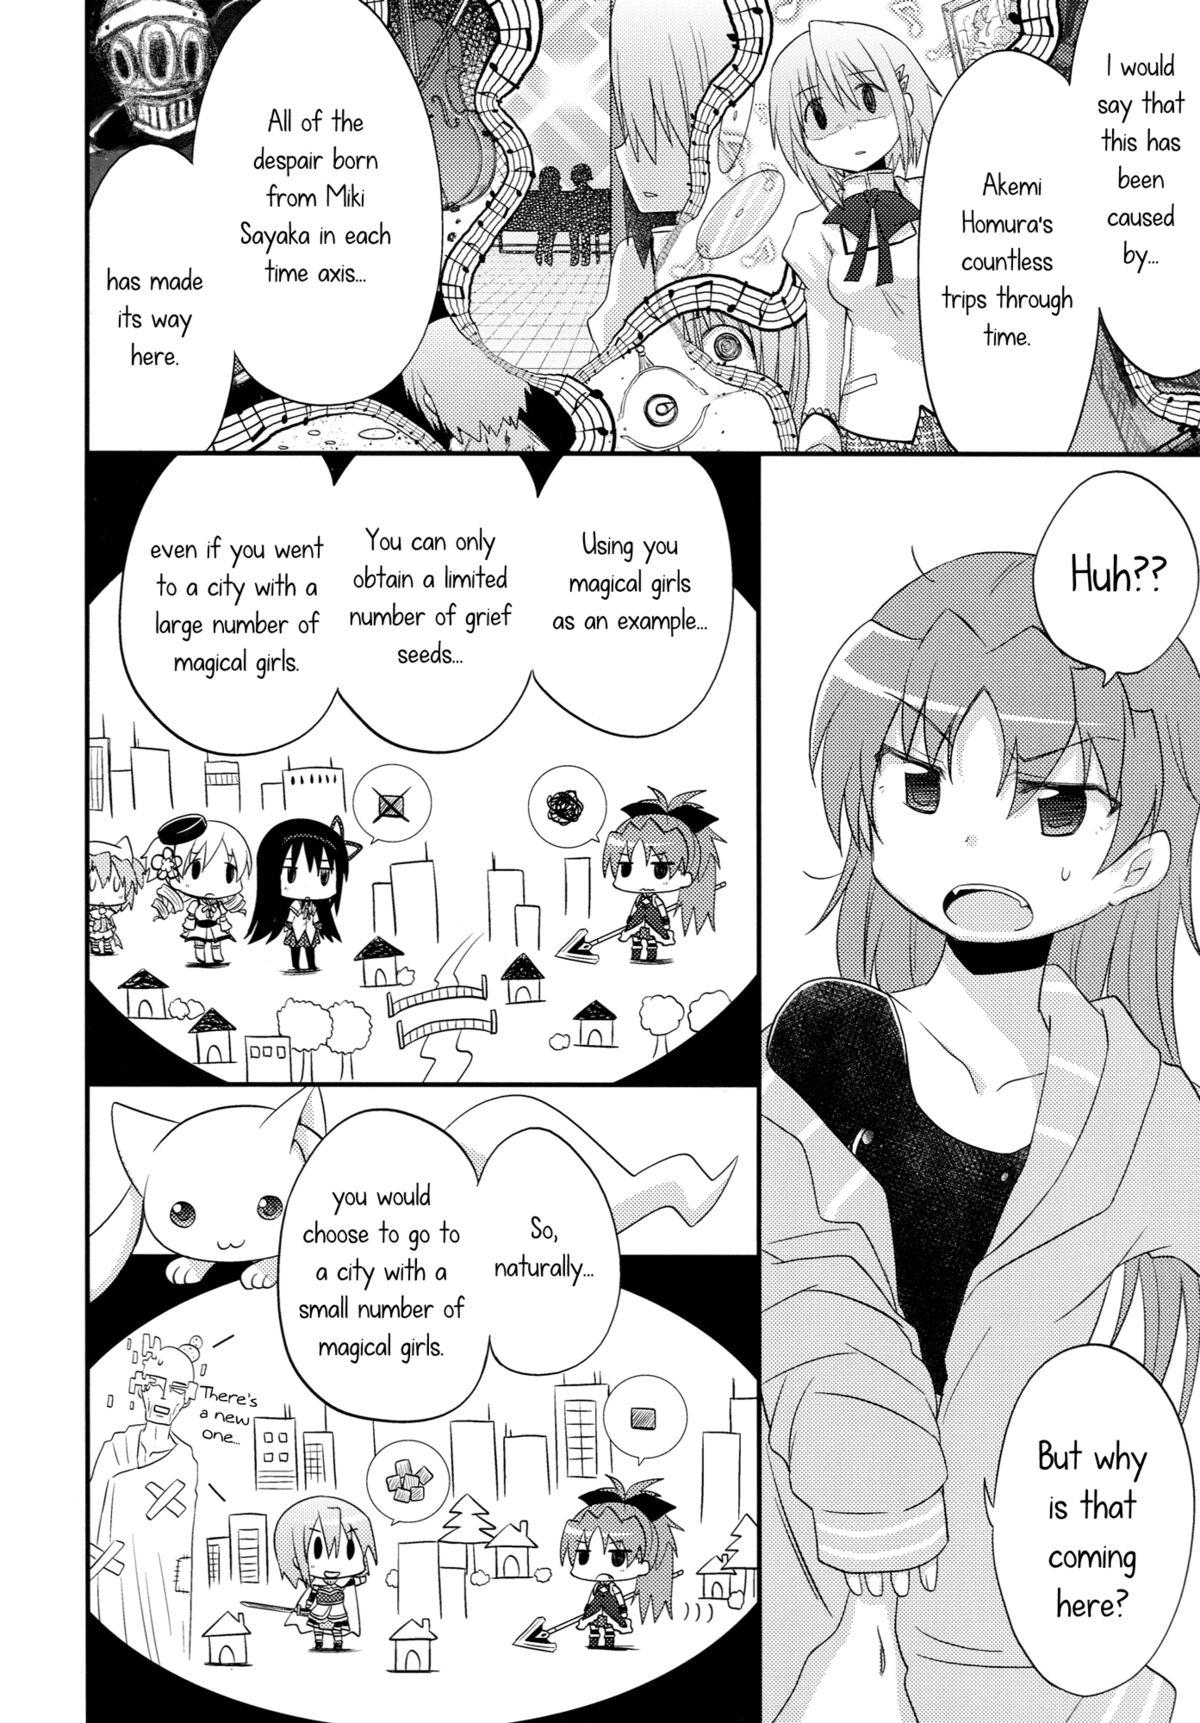 Forbidden Our Courting War Front - Puella magi madoka magica Trimmed - Page 9